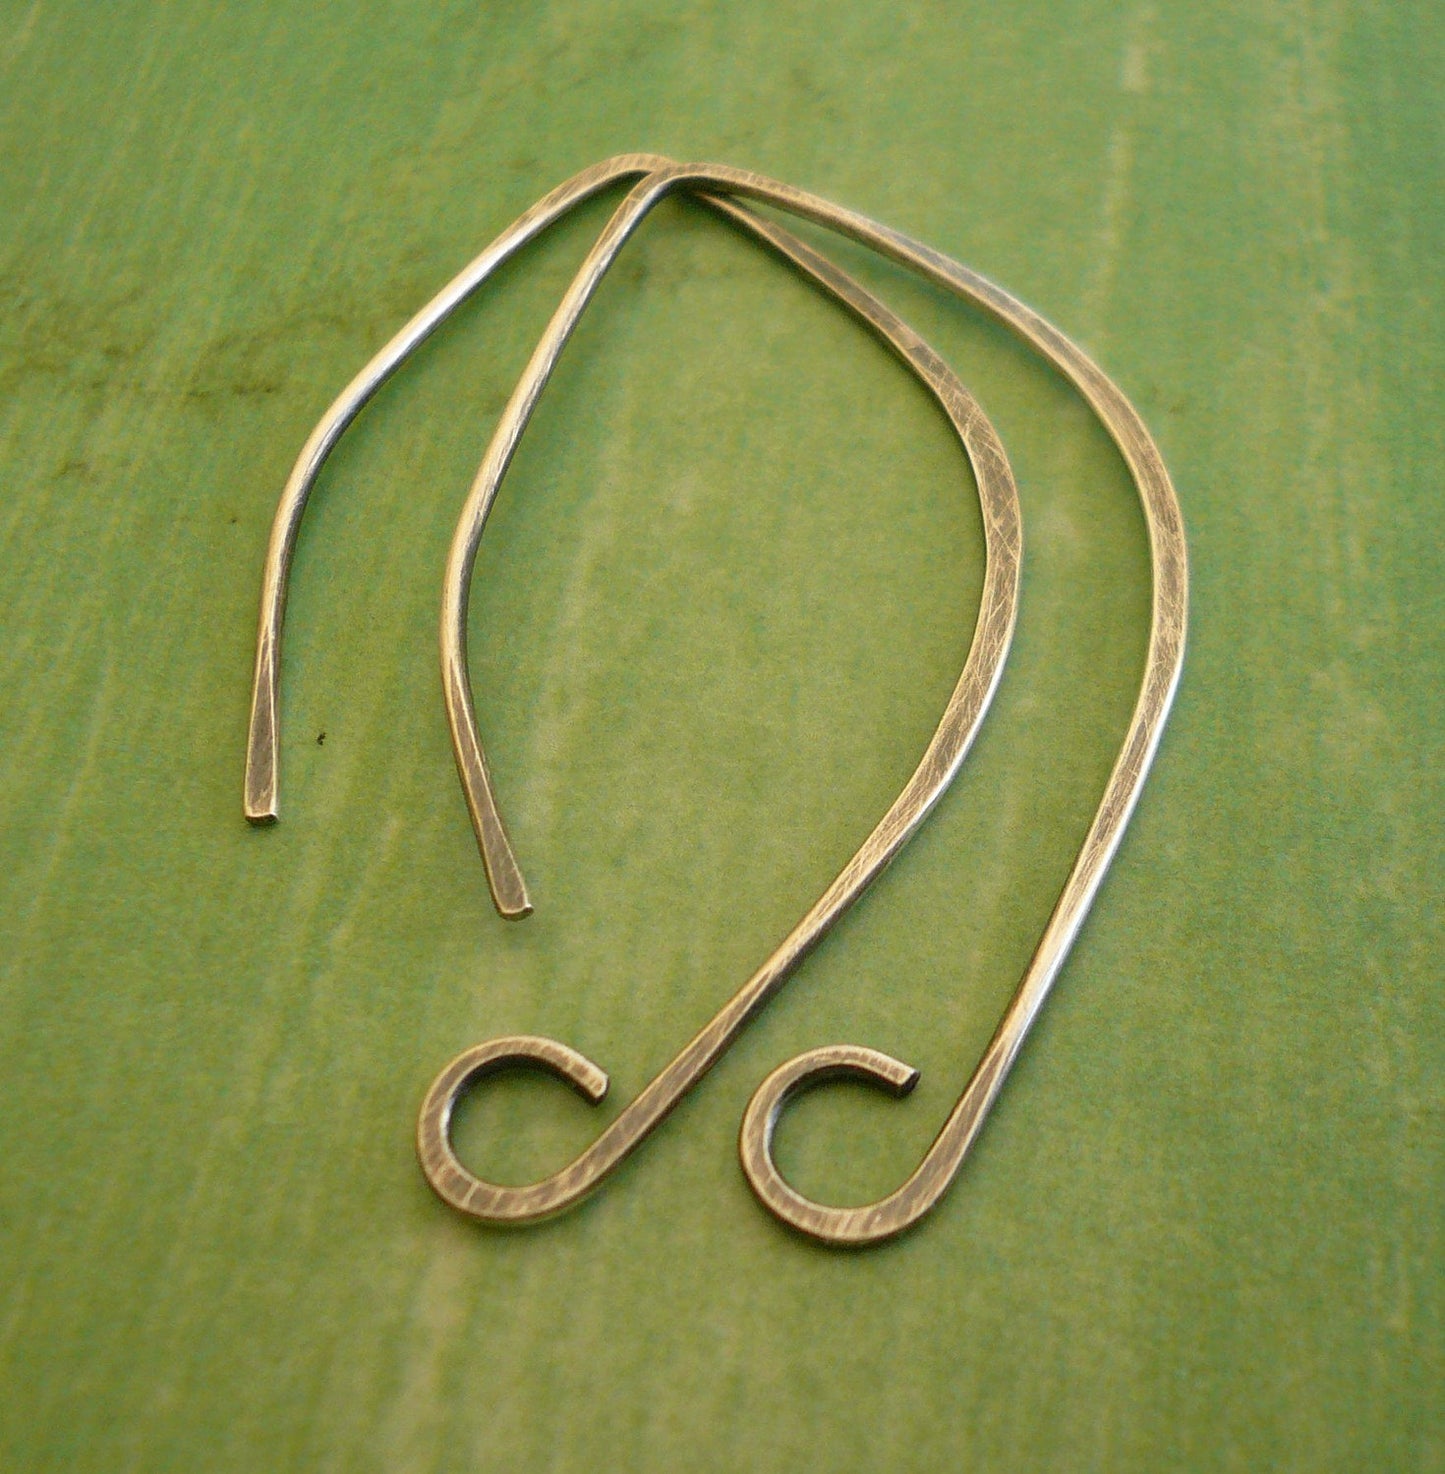 12 Pairs of my Hint Sterling Silver Earwires - Handmade. Handforged. Oxidized and polished